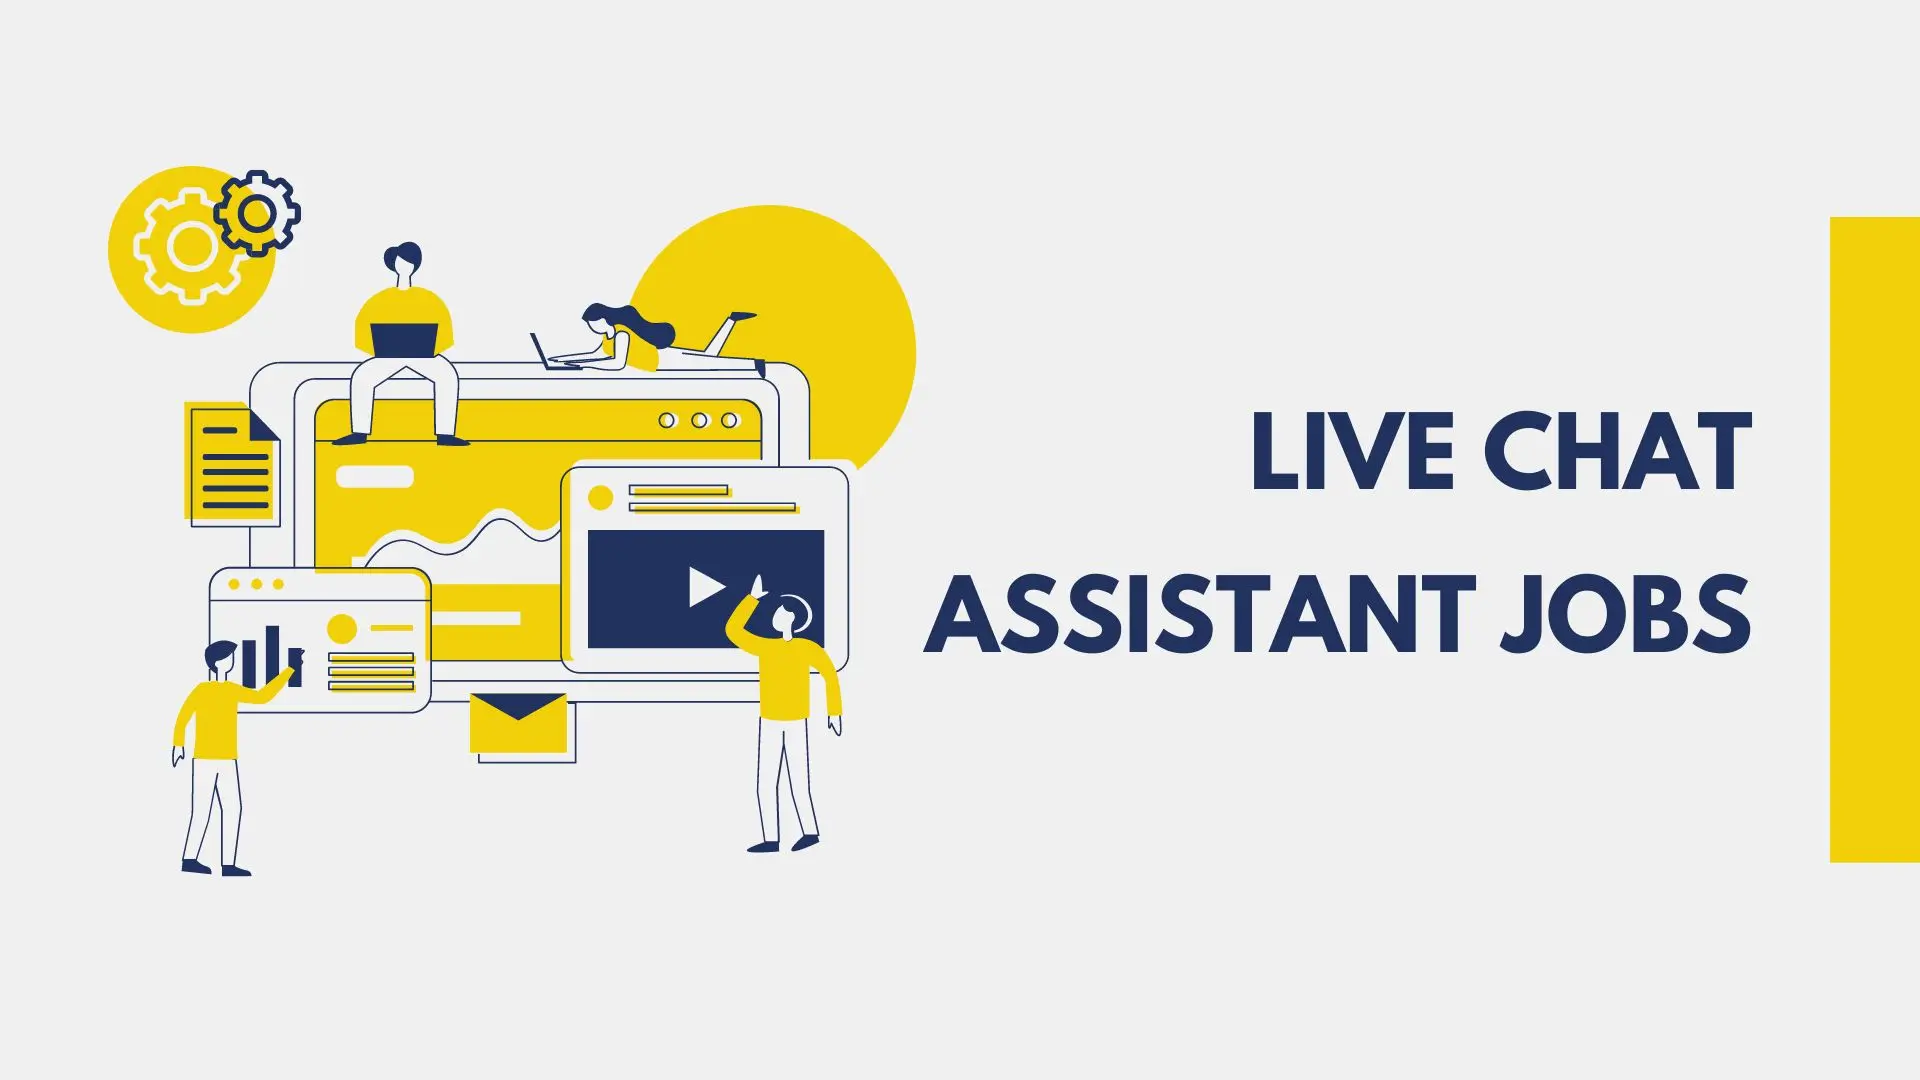 Live Chat Assistant Jobs